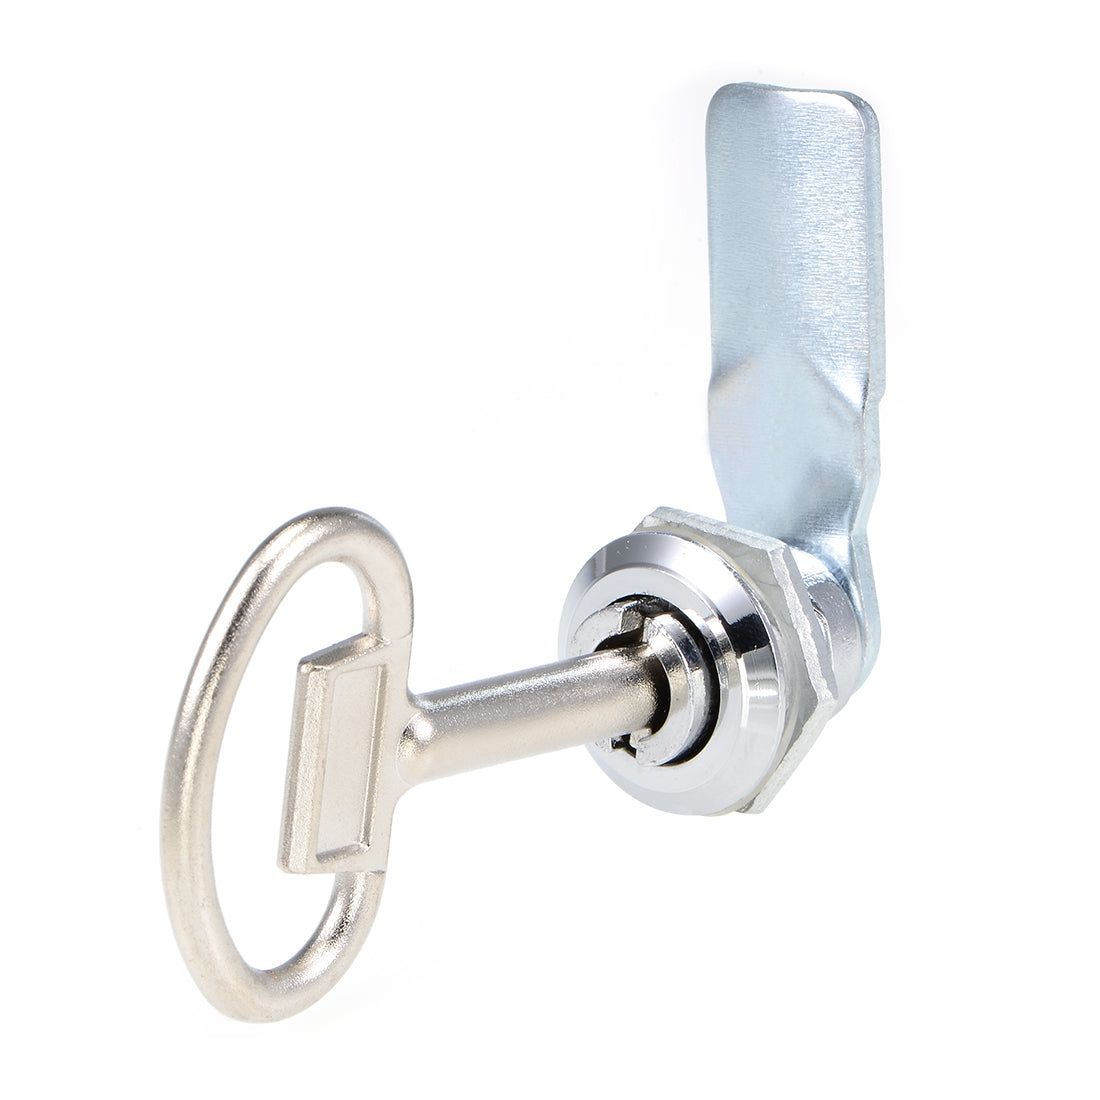 uxcell Uxcell Tubular Cam Lock 22mm Cylinder Dia 52mm Straight Cam Slotted Keyed Alike 2Pcs